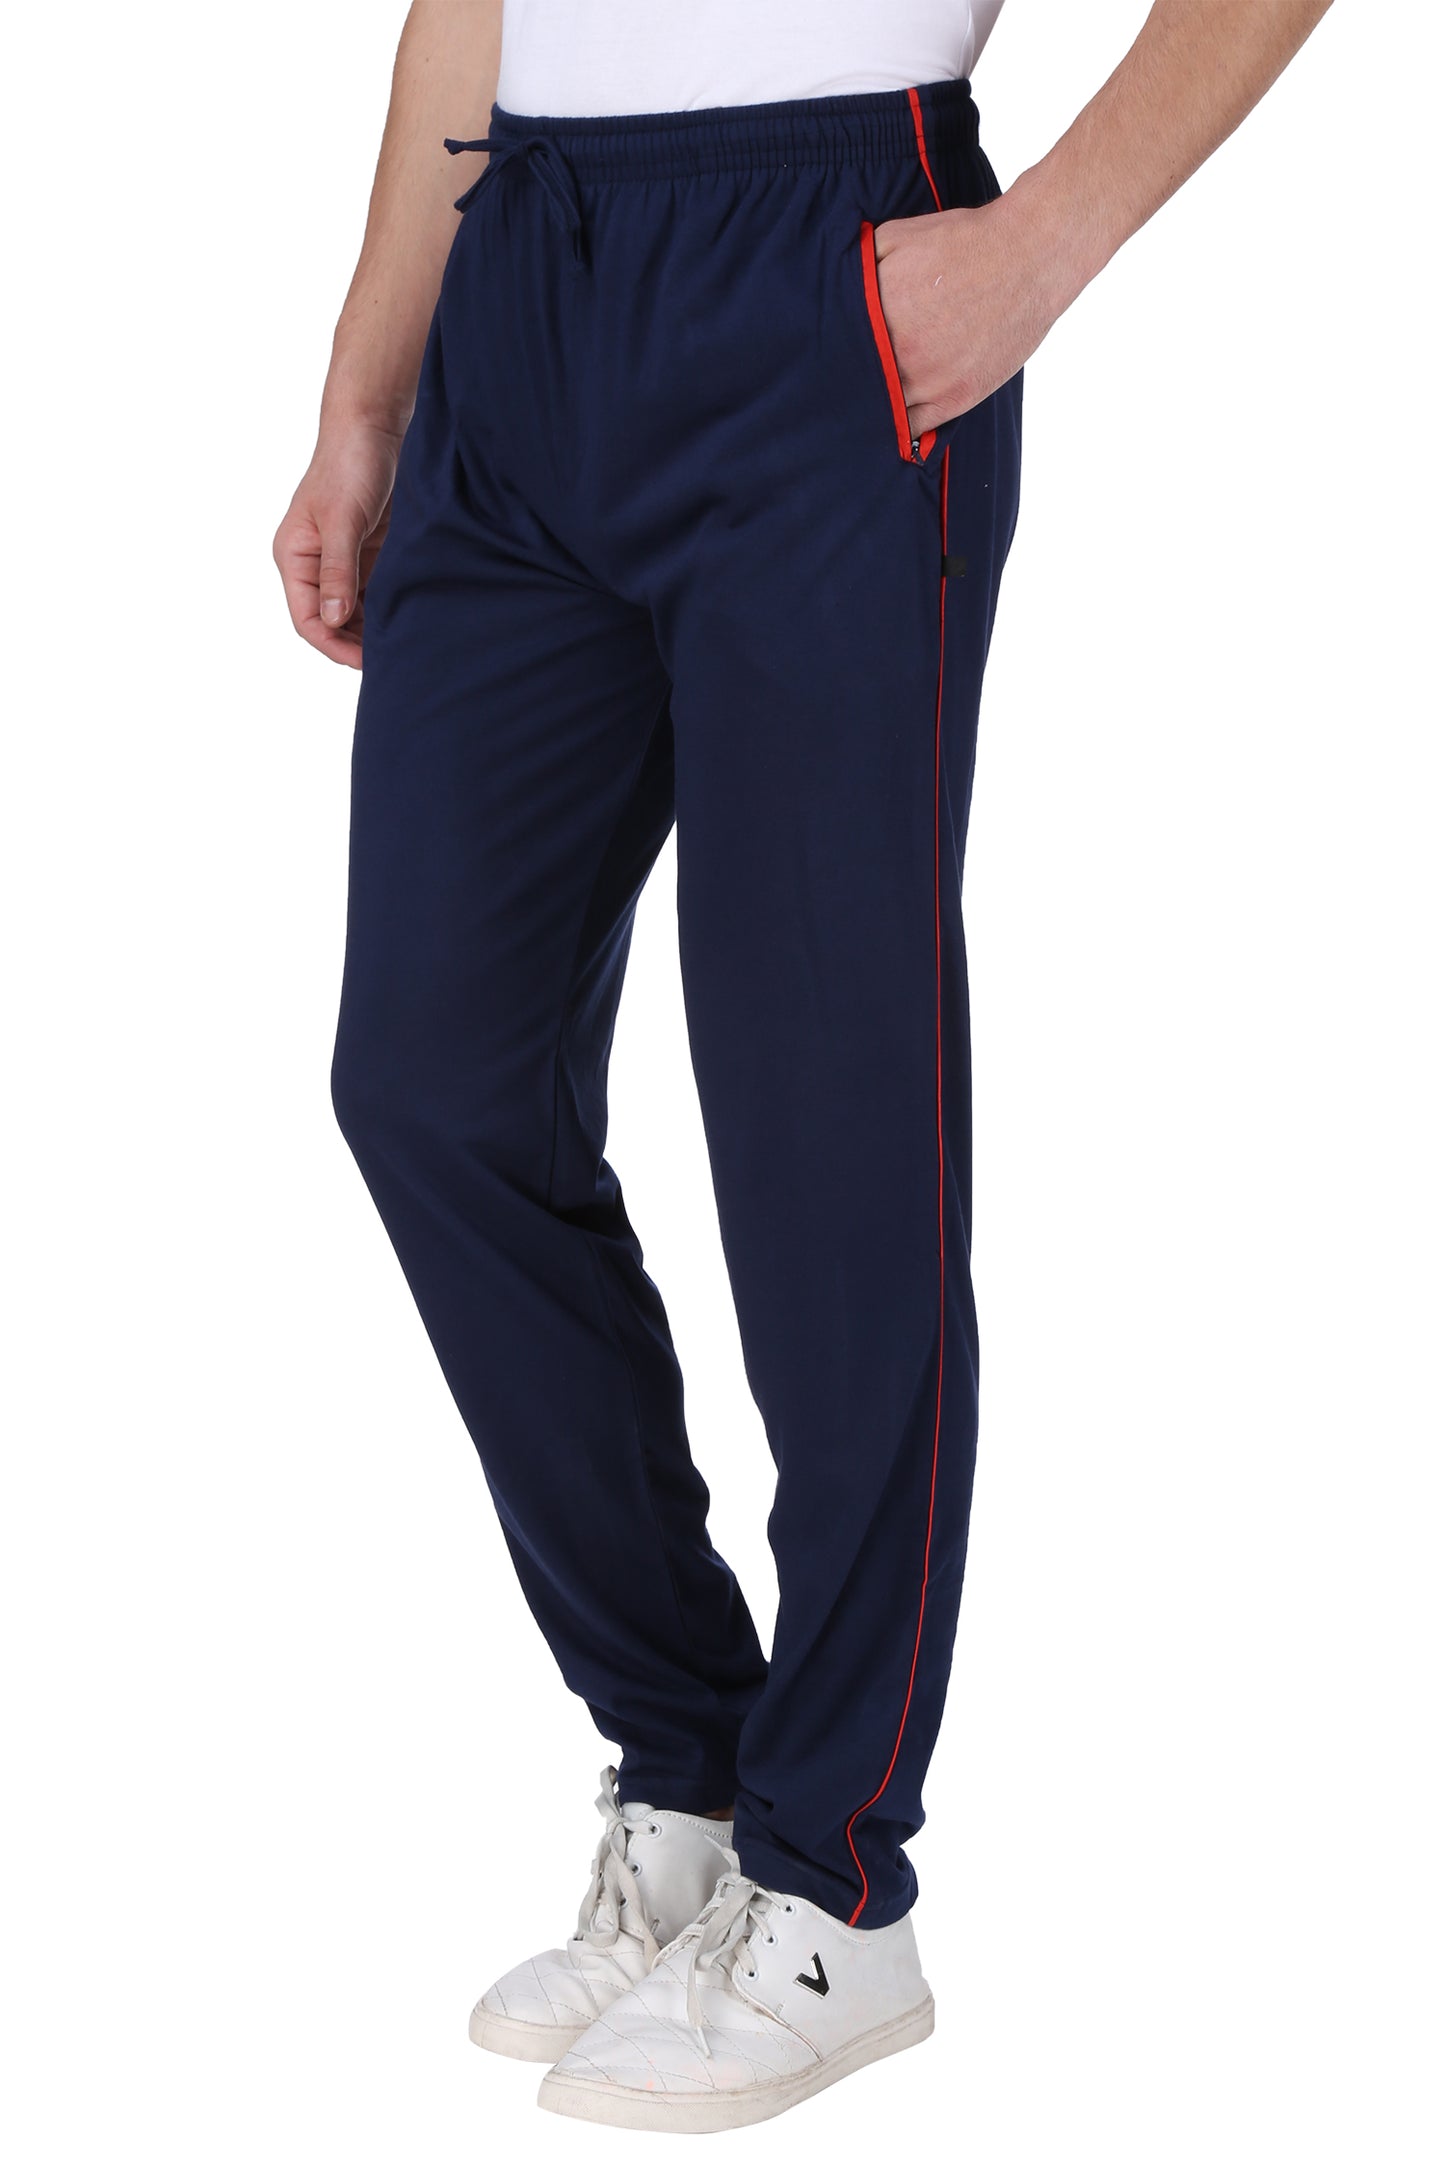 NEO GARMENTS Men's Cotton TRACK PANTS | DENIM BLUE | SIZES FROM M TO 9XL.